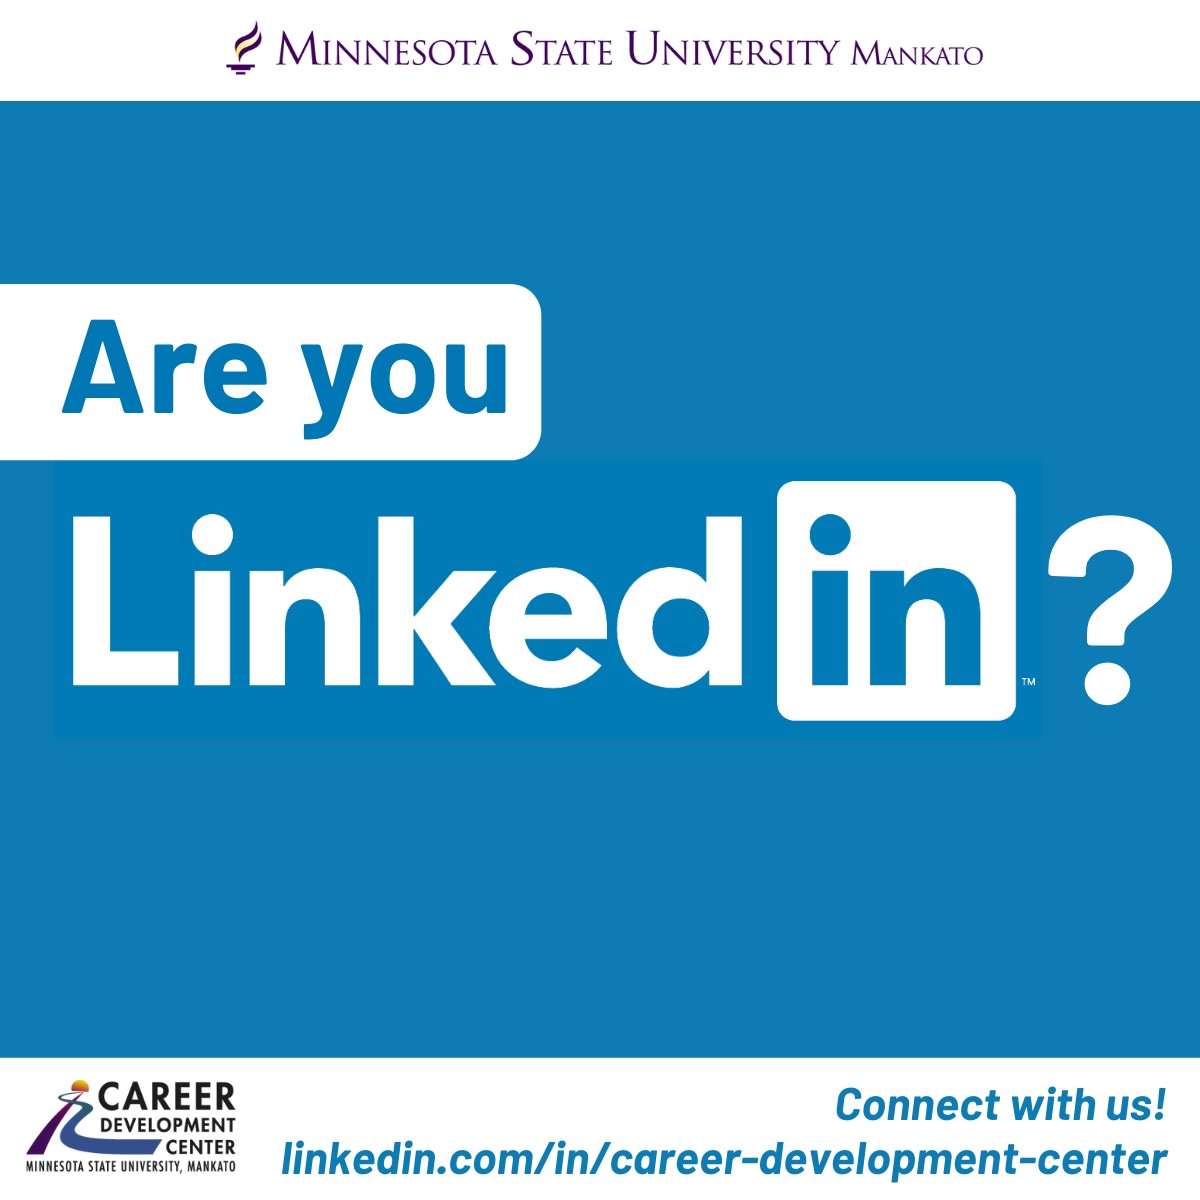 mnsu linked in prop card which says "are you linked in?"